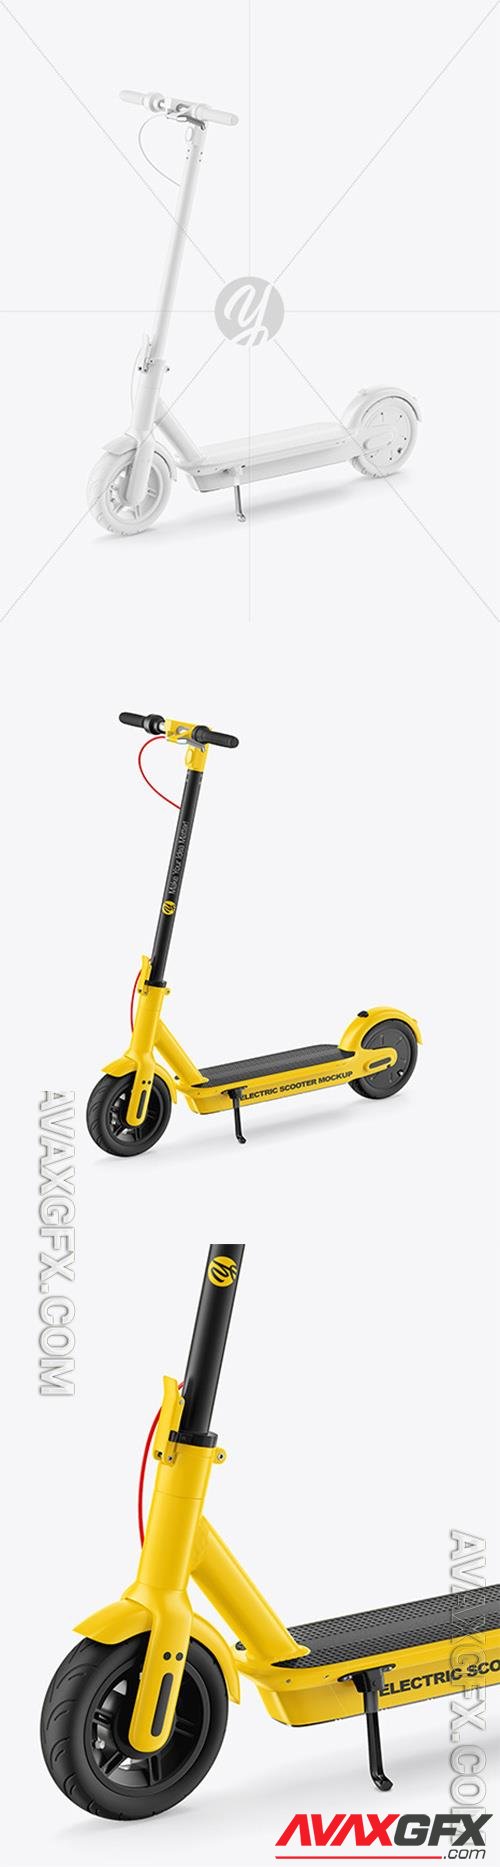 Electric Scooter Mockup - Half Side View 86210 TIF